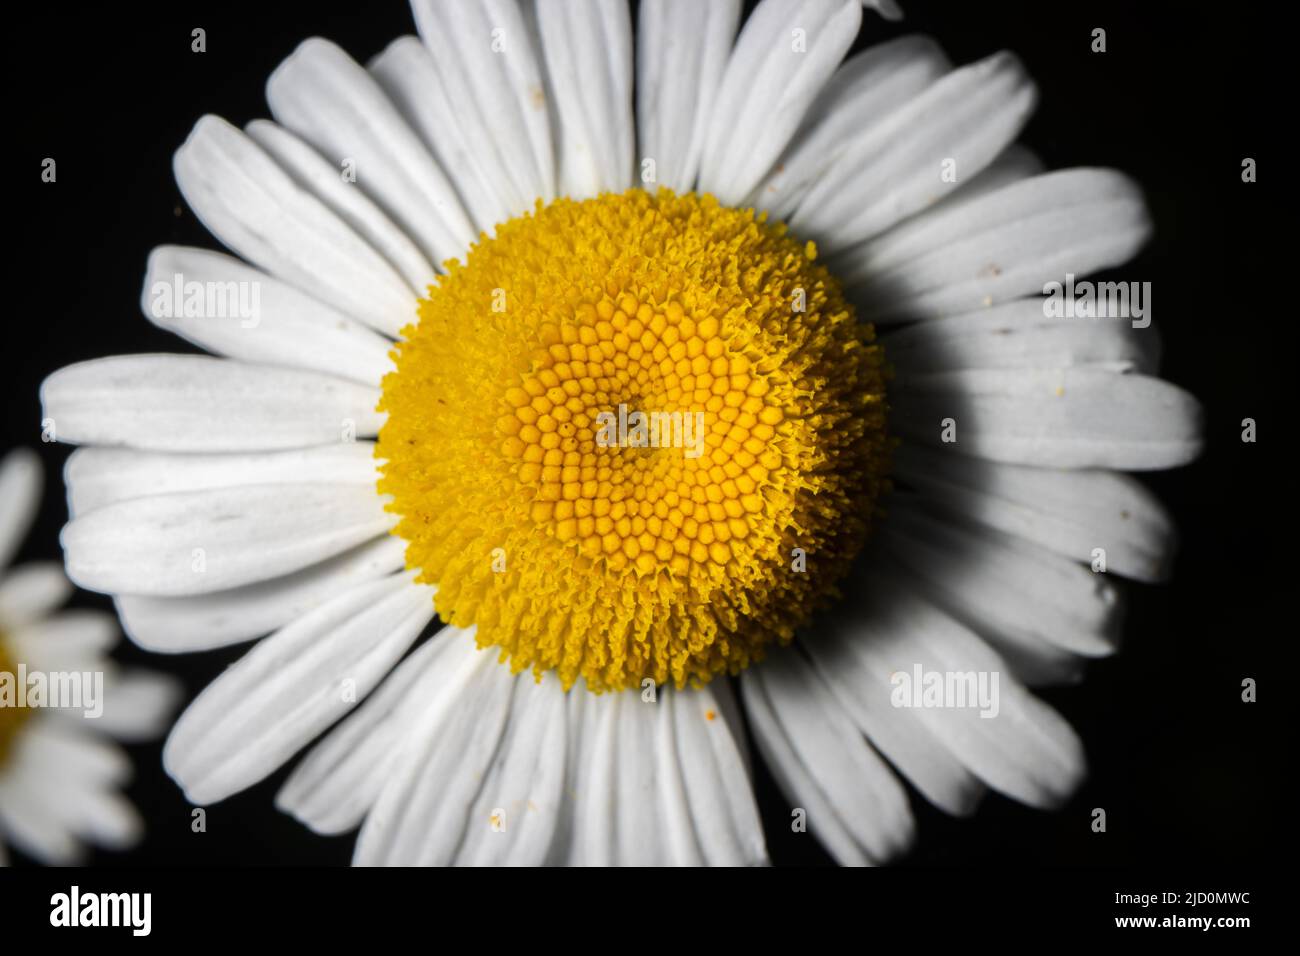 Up close view of wild daisies. Stock Photo